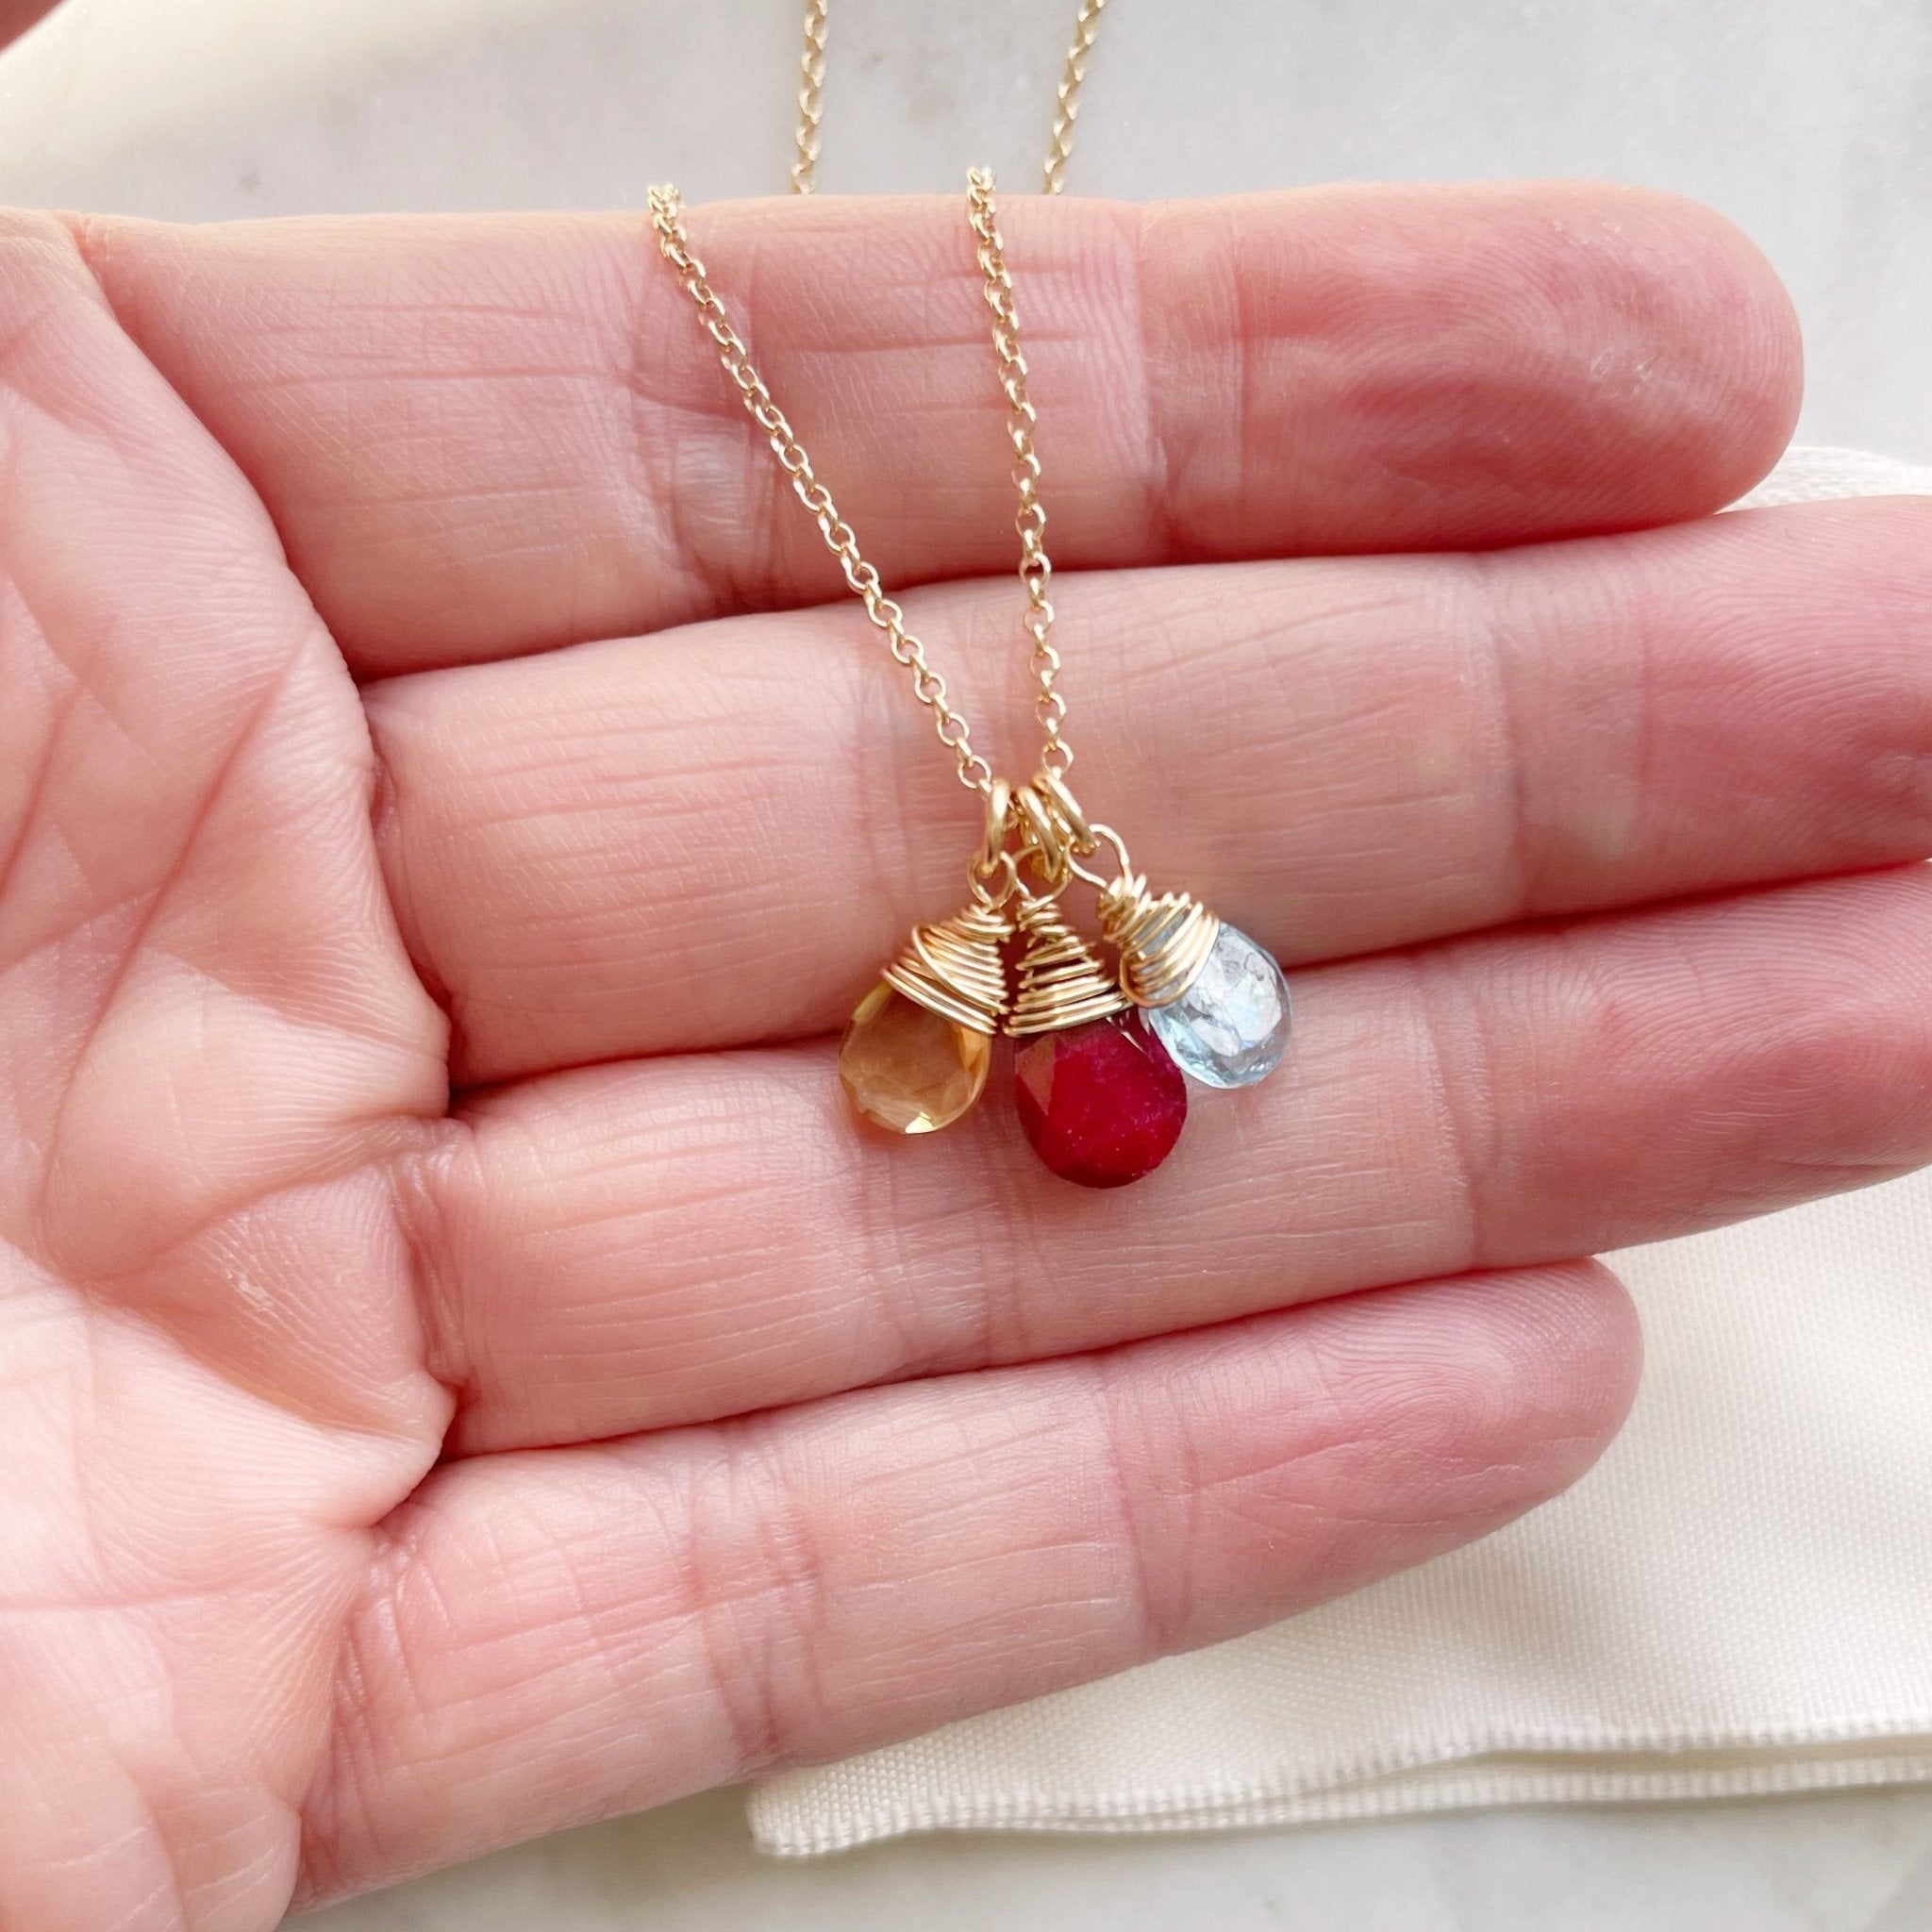 Hand holding gold wire wrapped gemstone birthstone necklace with yellow, red and light blue gemstone pendants. Heritage Necklace by Sarah Cornwell Jewelry